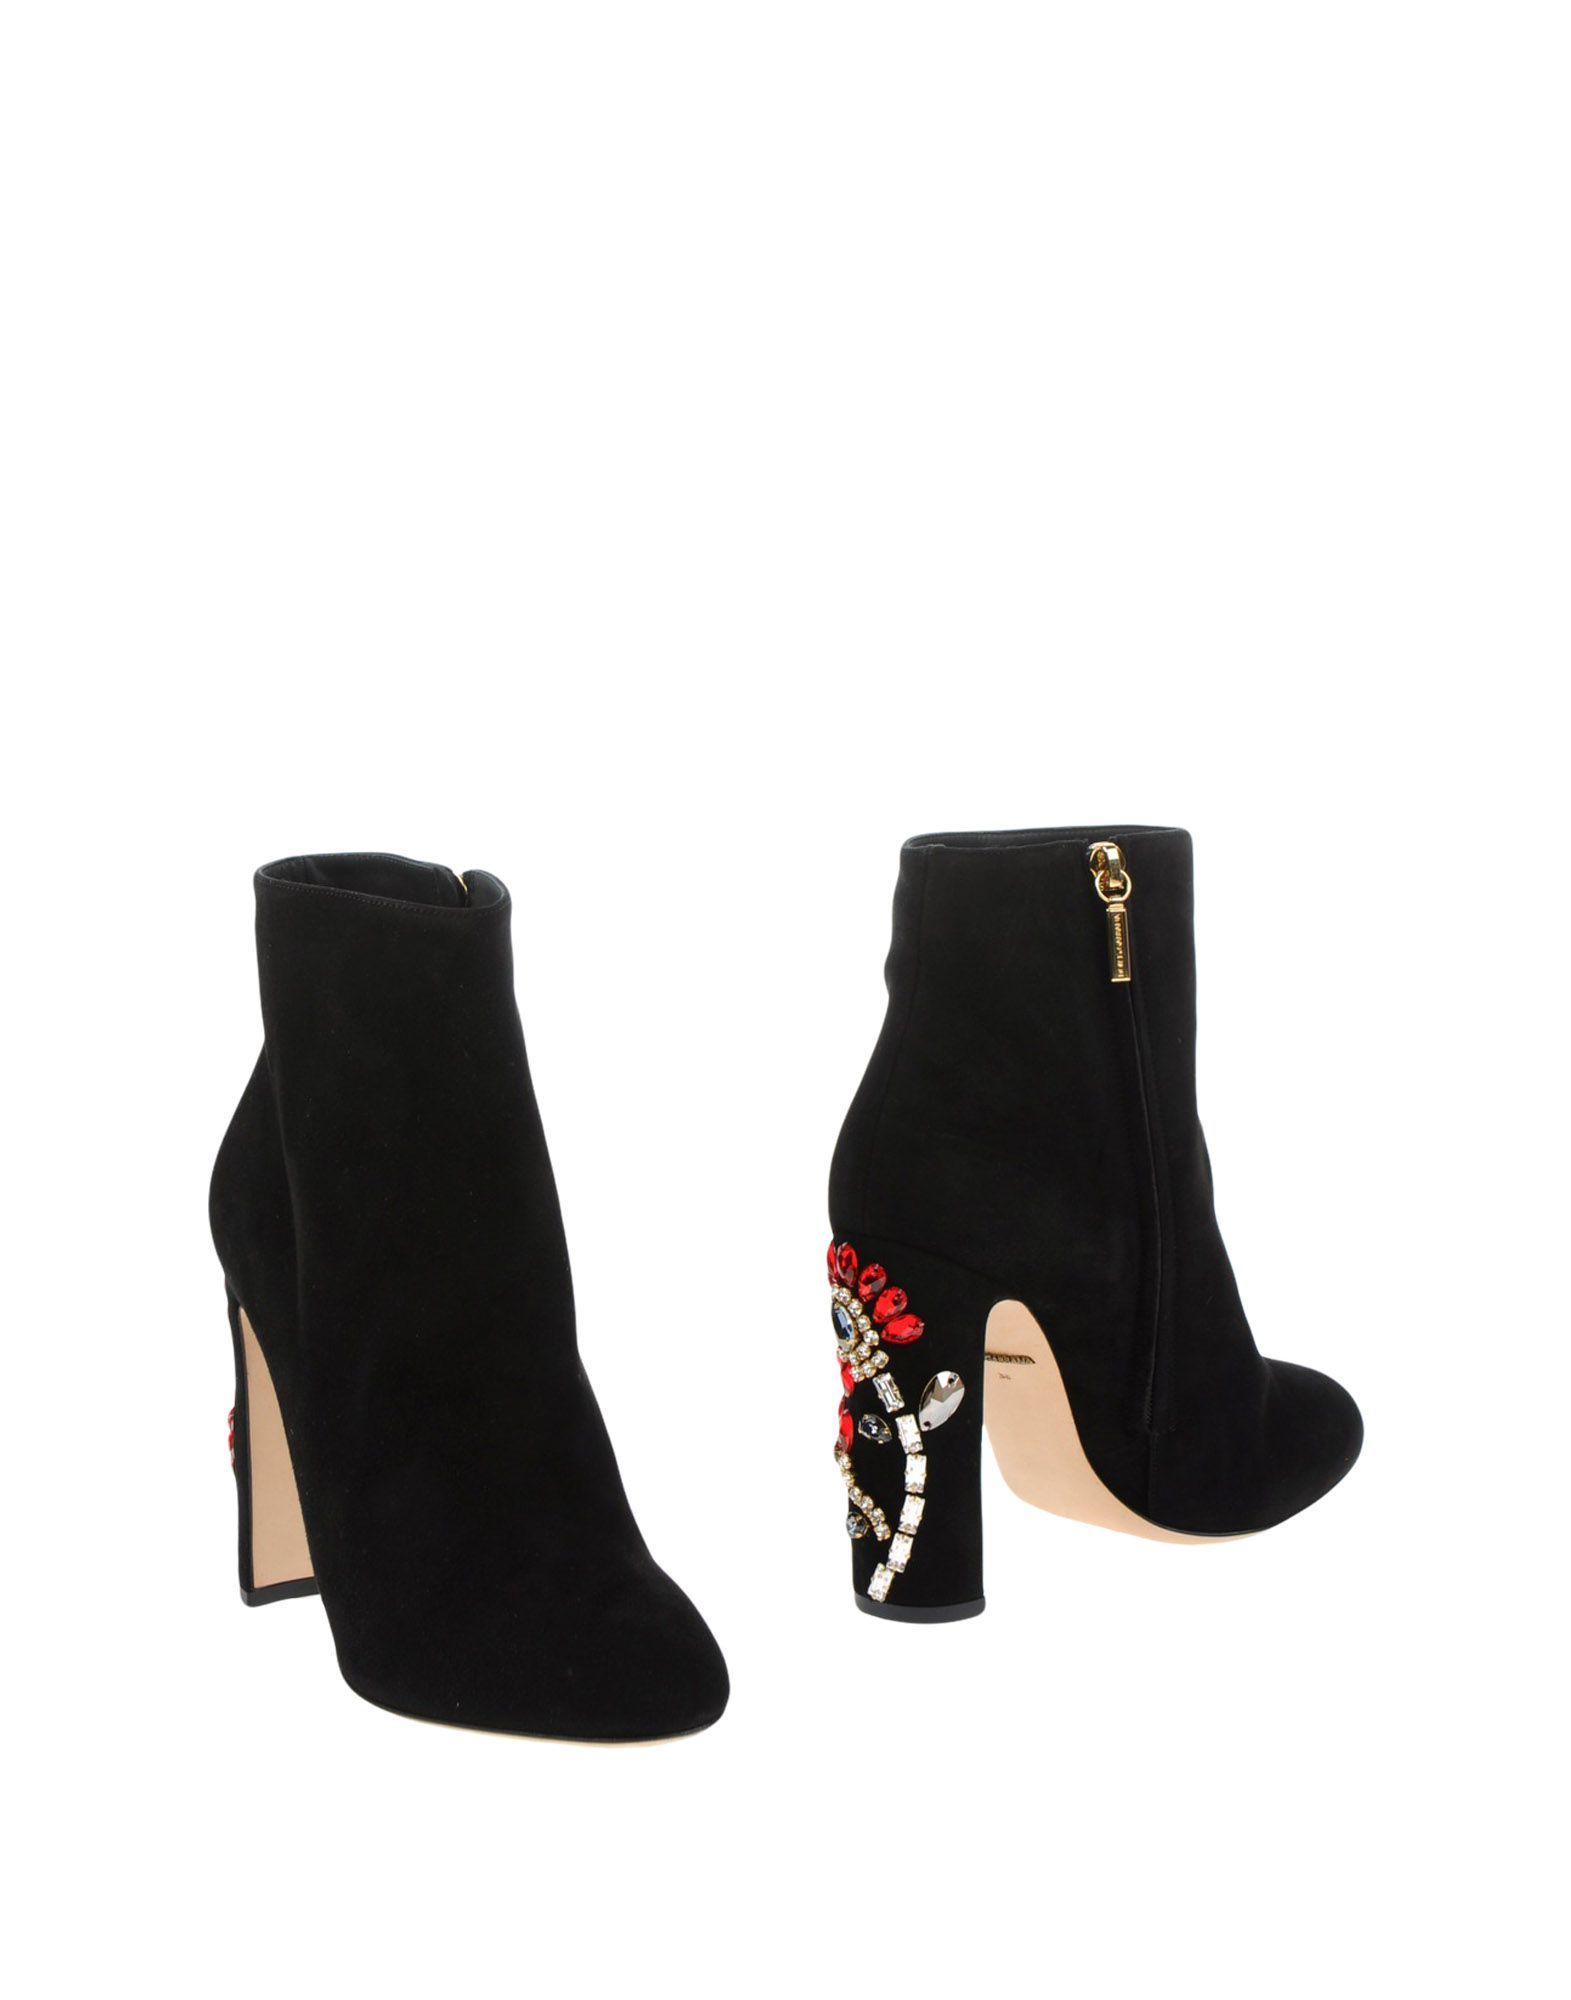 DOLCE & GABBANA Ankle boots | YOOX (US)